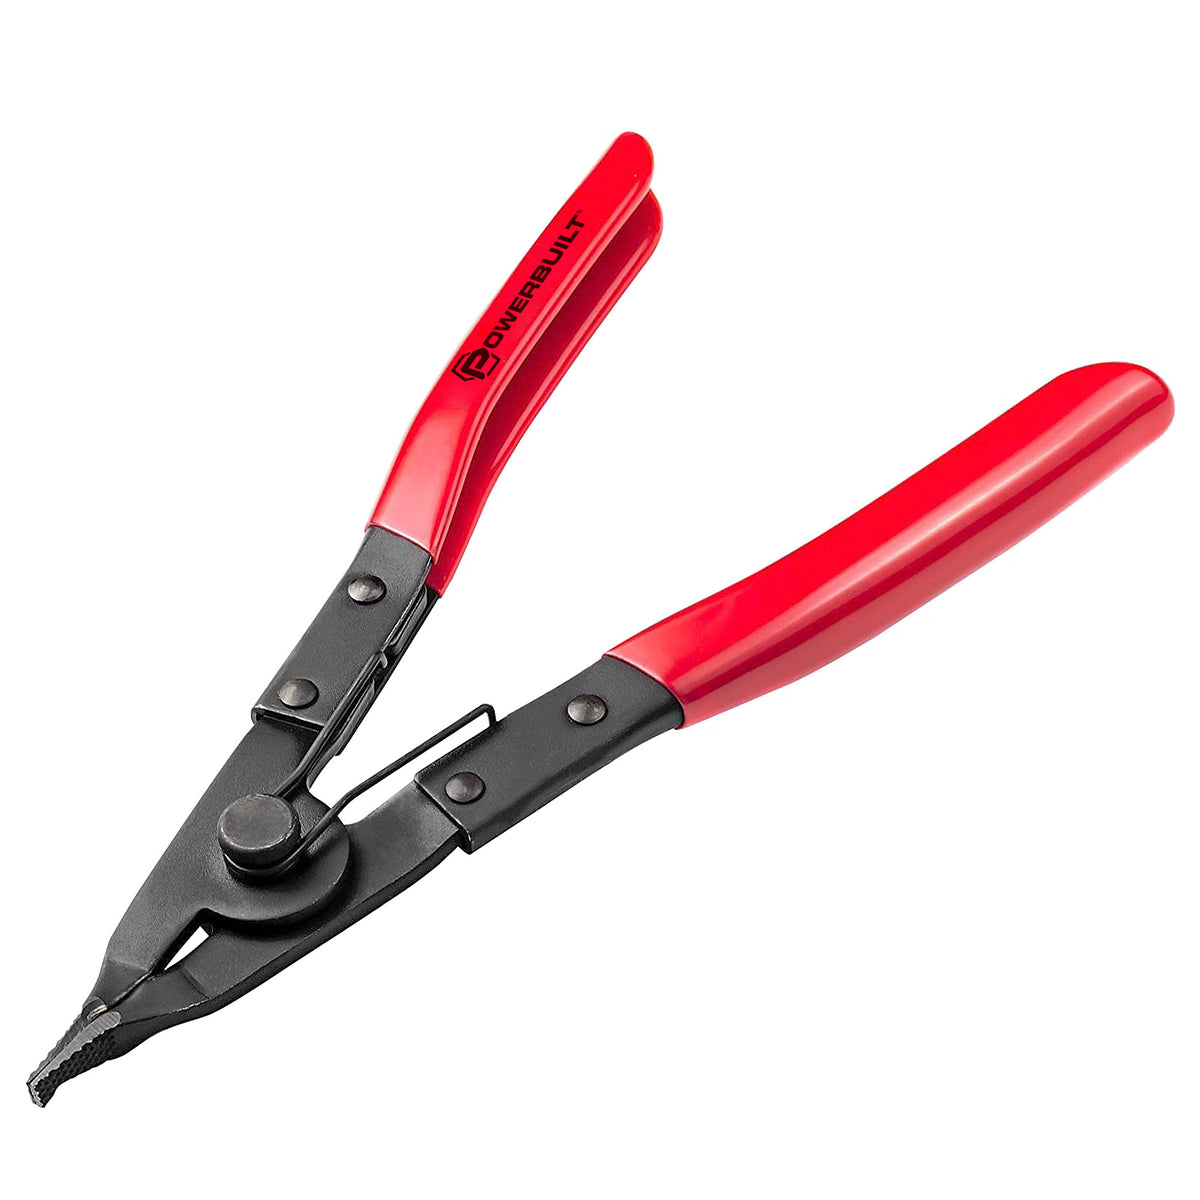 Powerbuilt COMBO SWITCH INT/EXT SNAP RING PLIERS(D) 941336